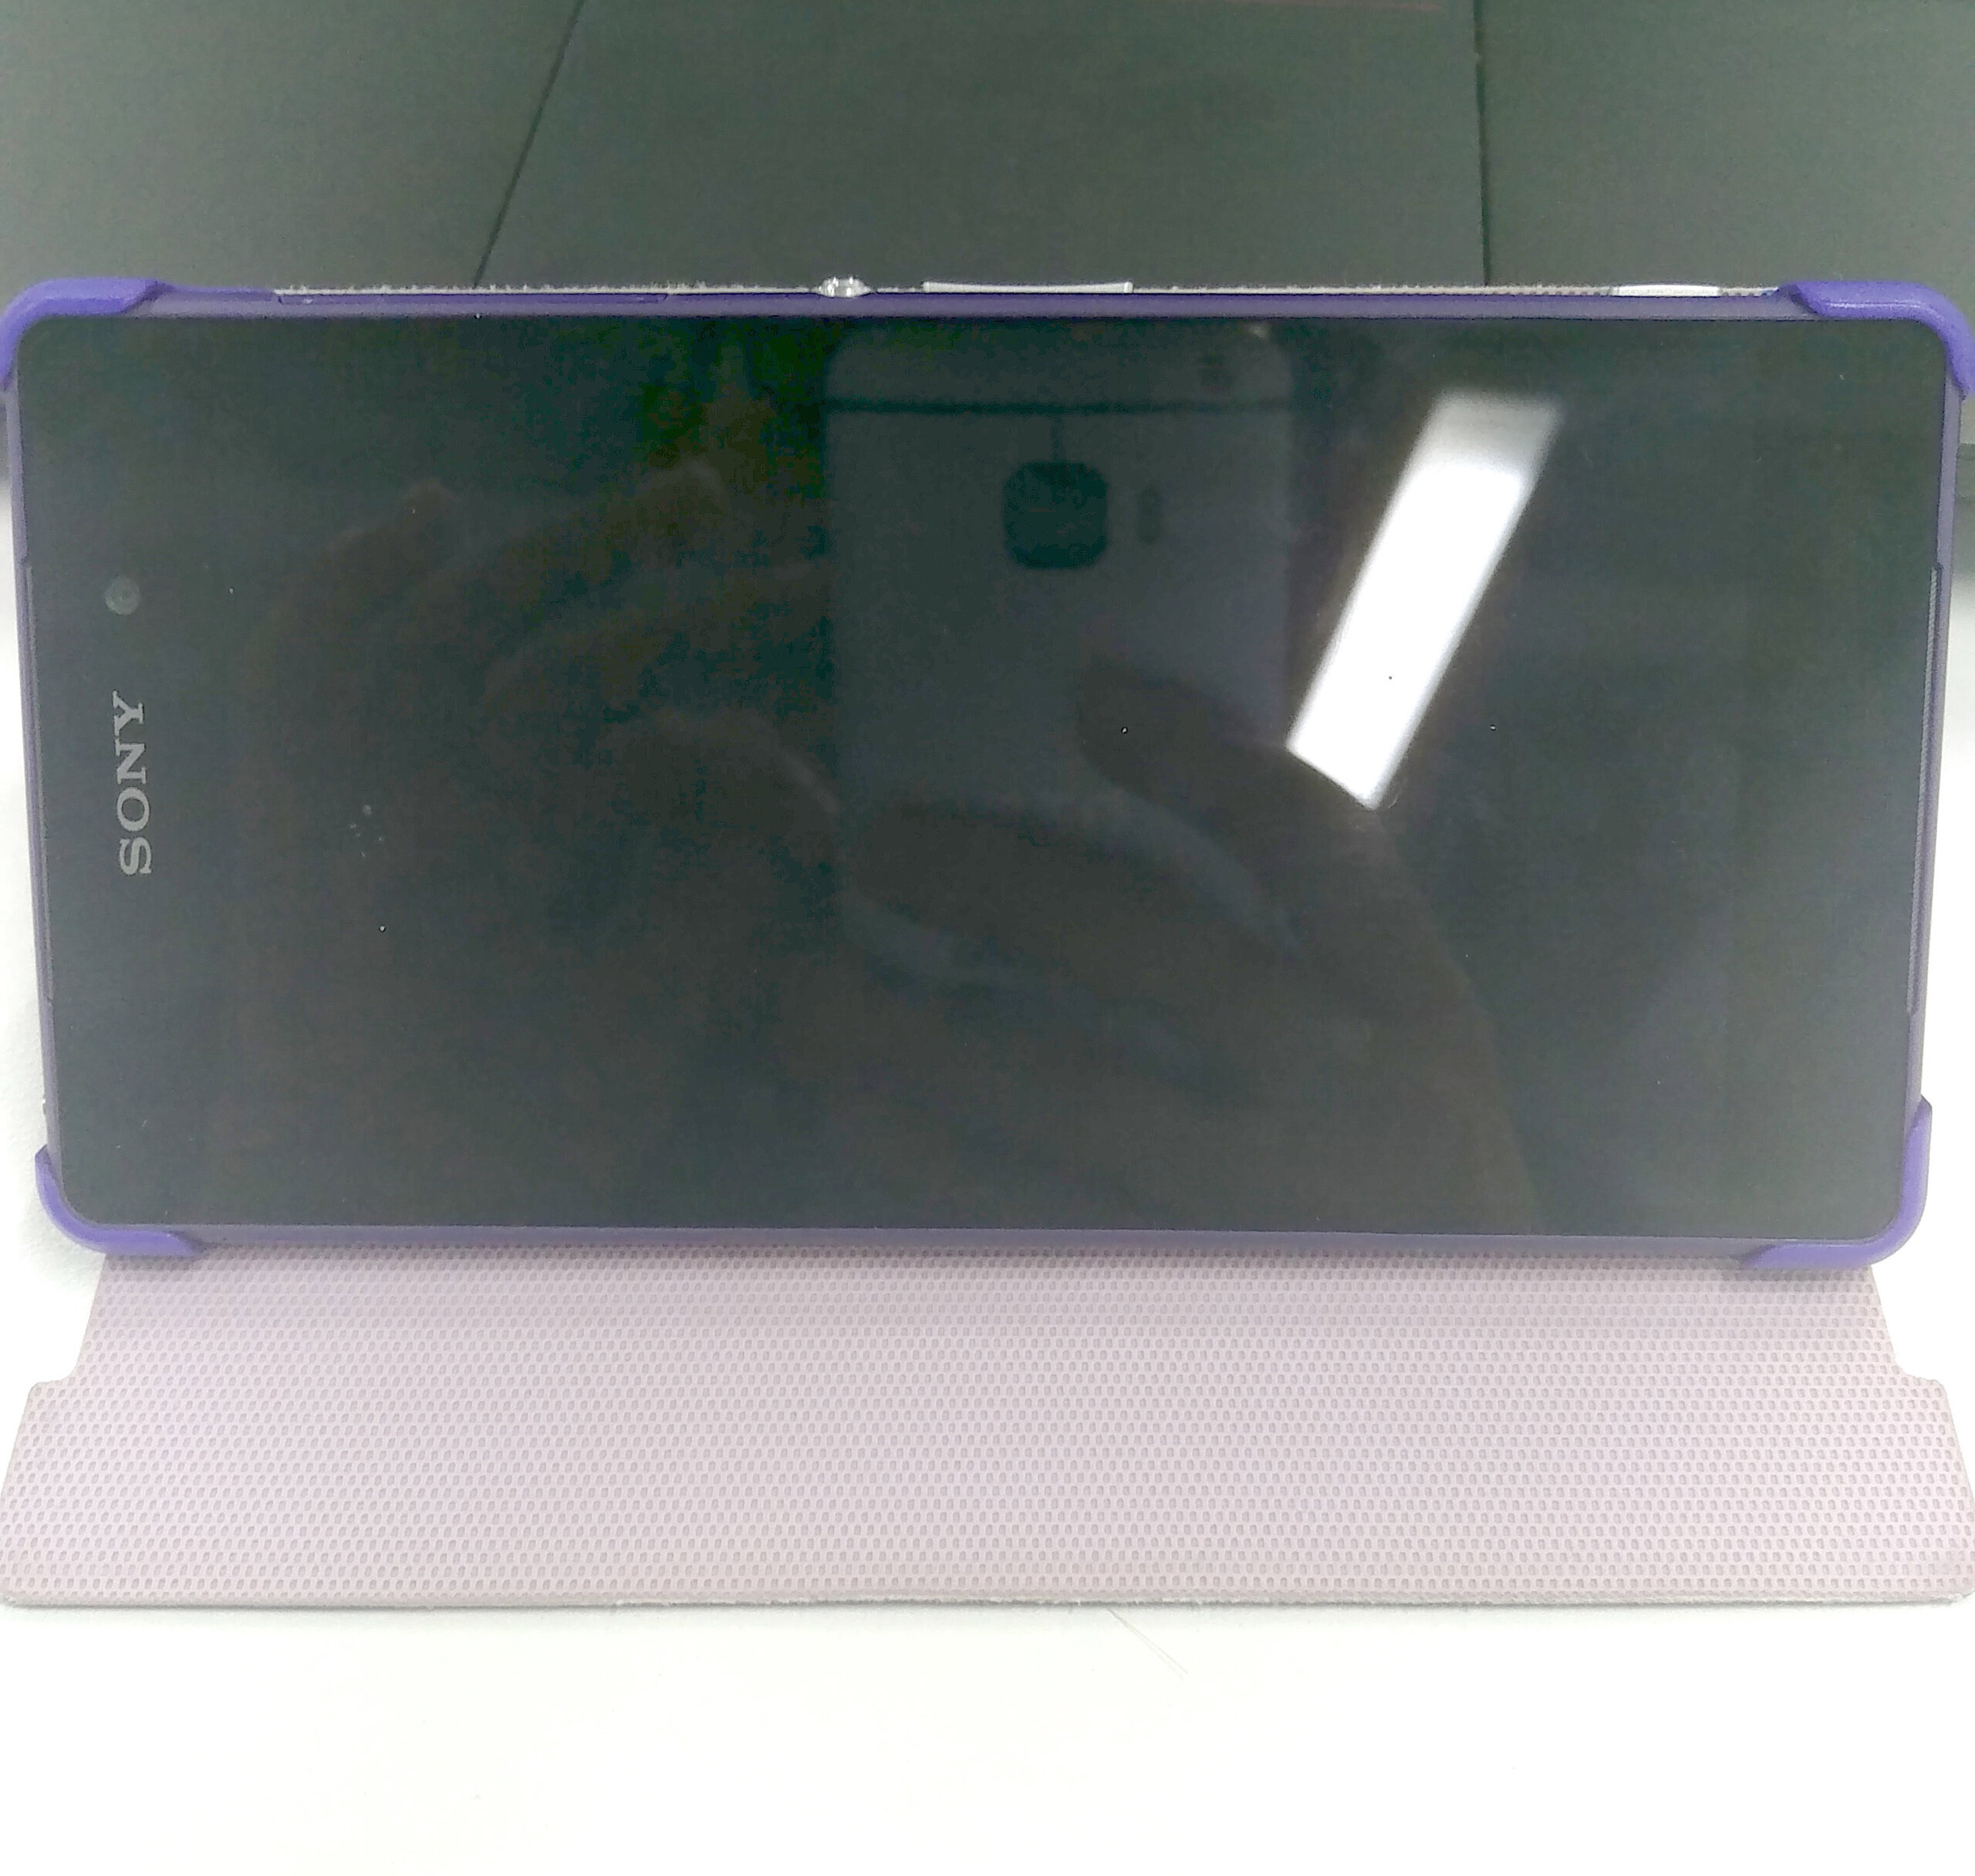 HTC One M9 Hima reflection scaled